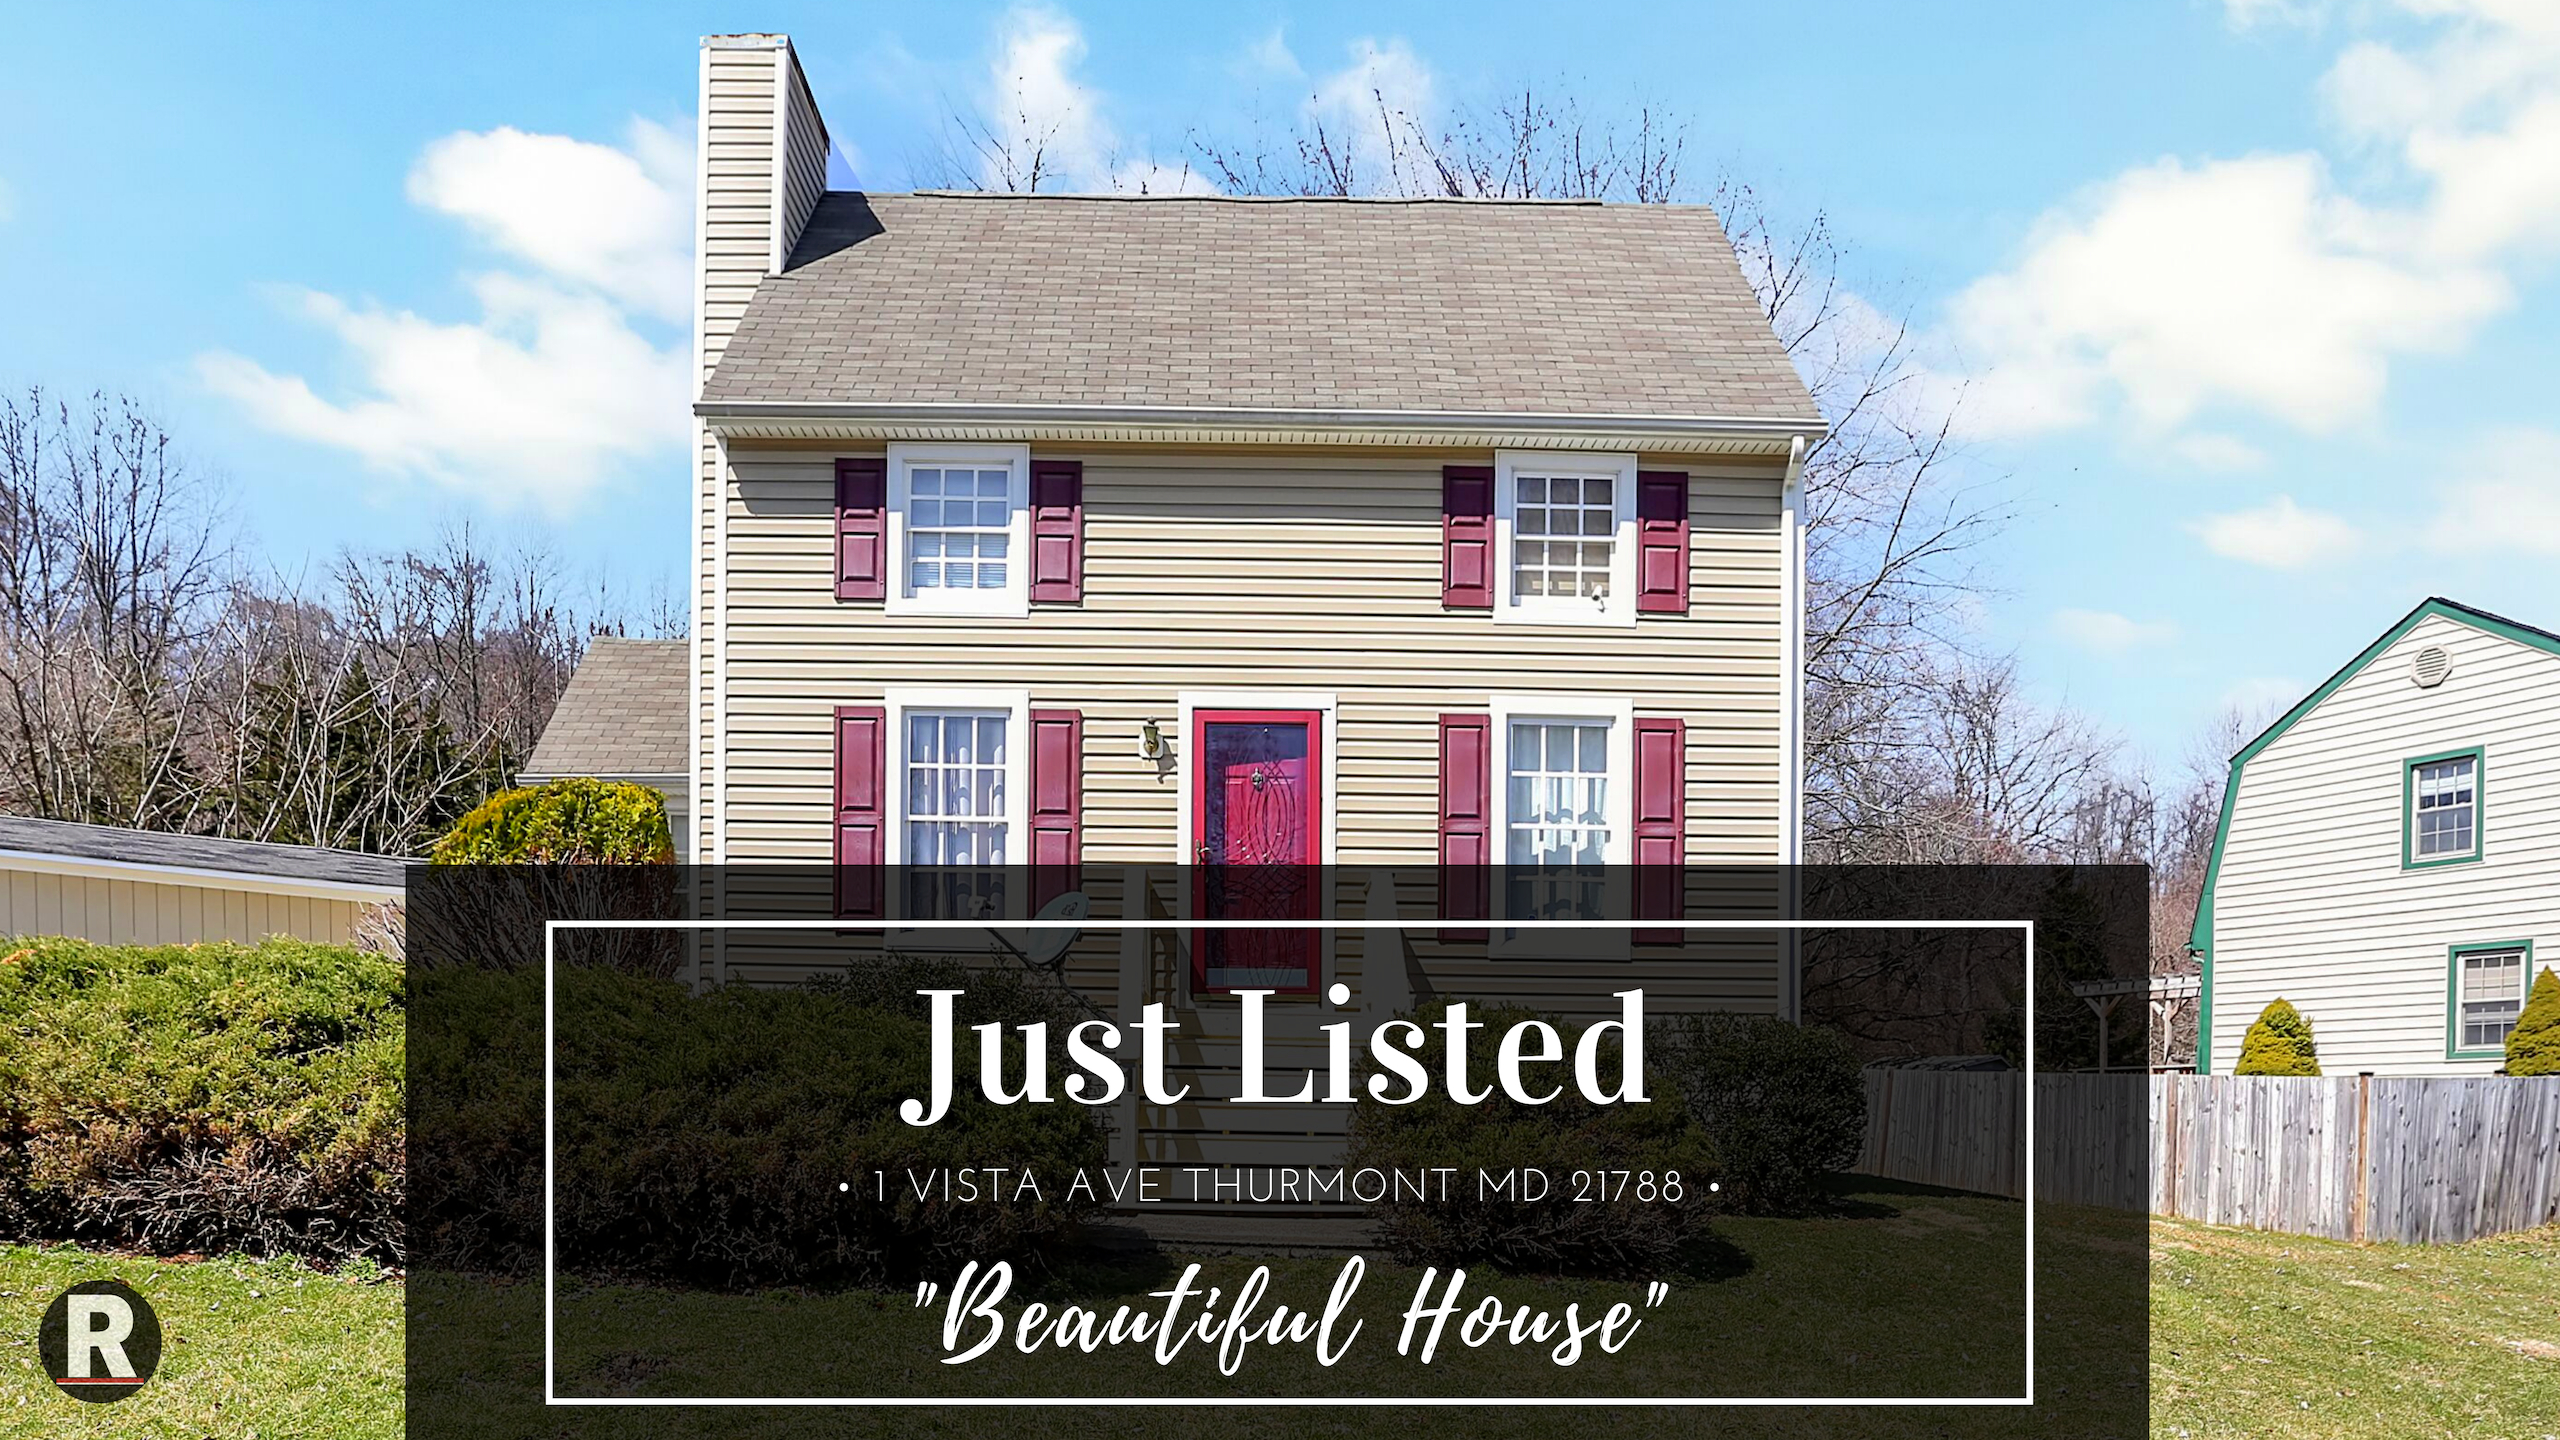 Just Listed! 1 Vista Ave Thurmont MD 21788